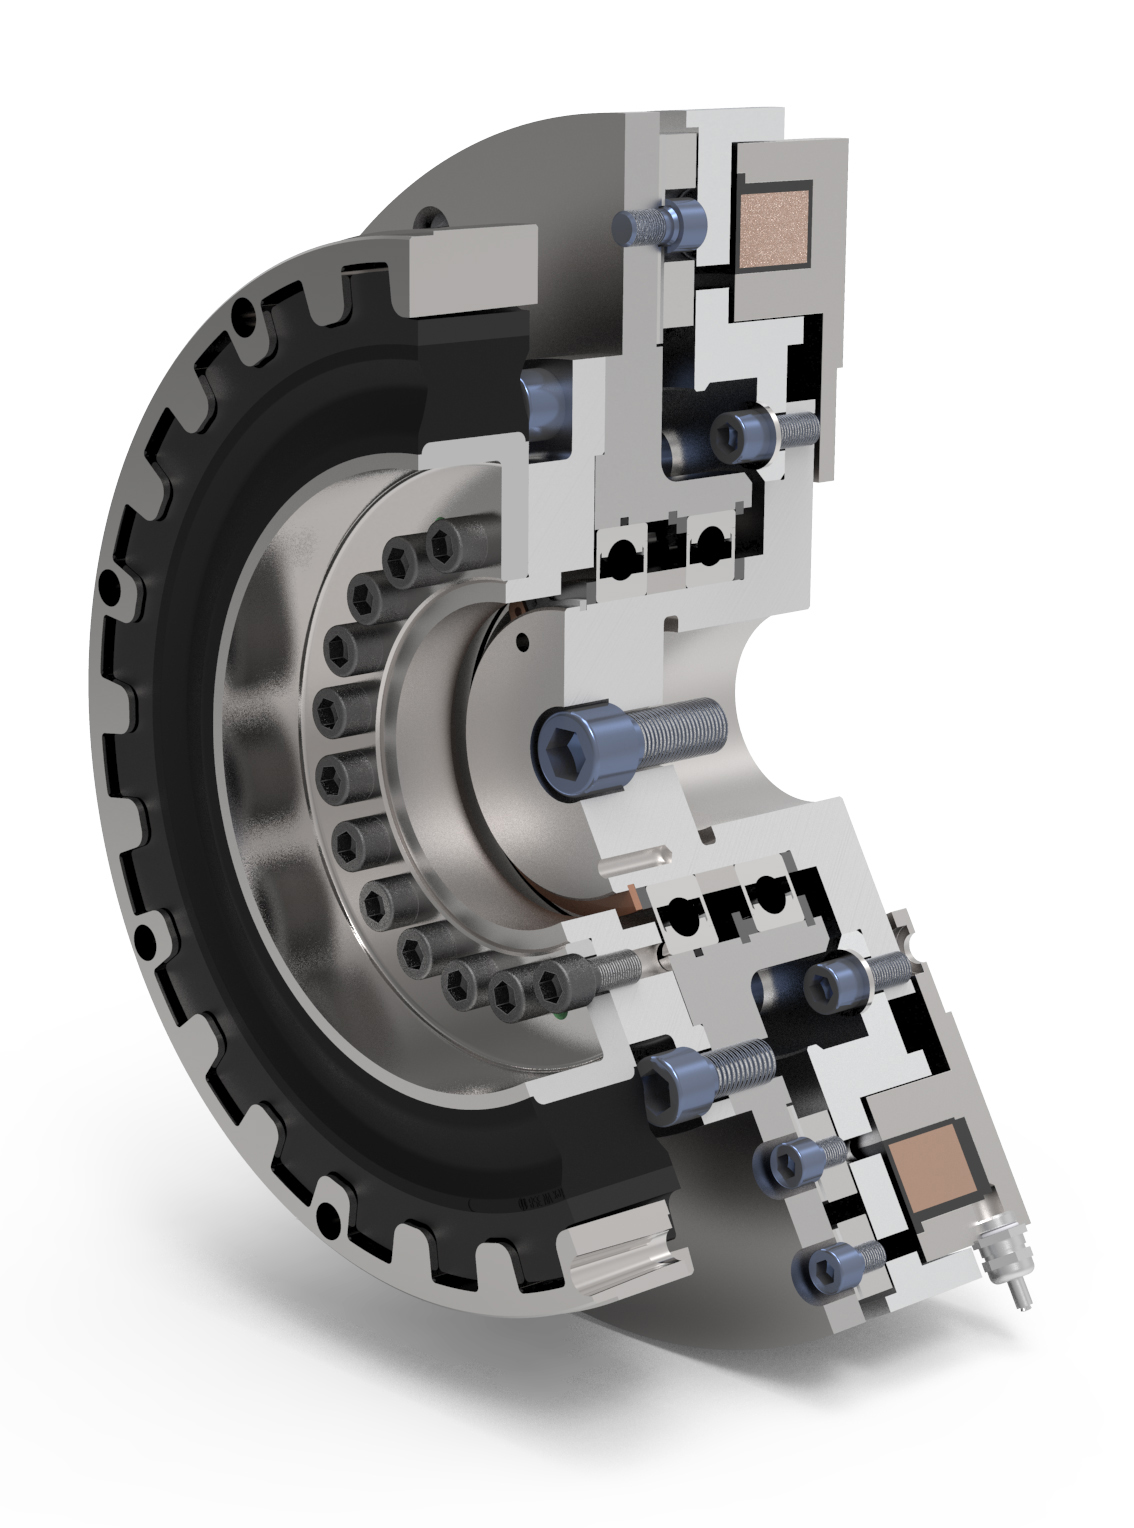 Stromag’s unique, modular 2in1 pre-engineered combinations feature an existing Stromag flexible coupling configured with an existing switchable clutch model for a compact, single-piece solution.